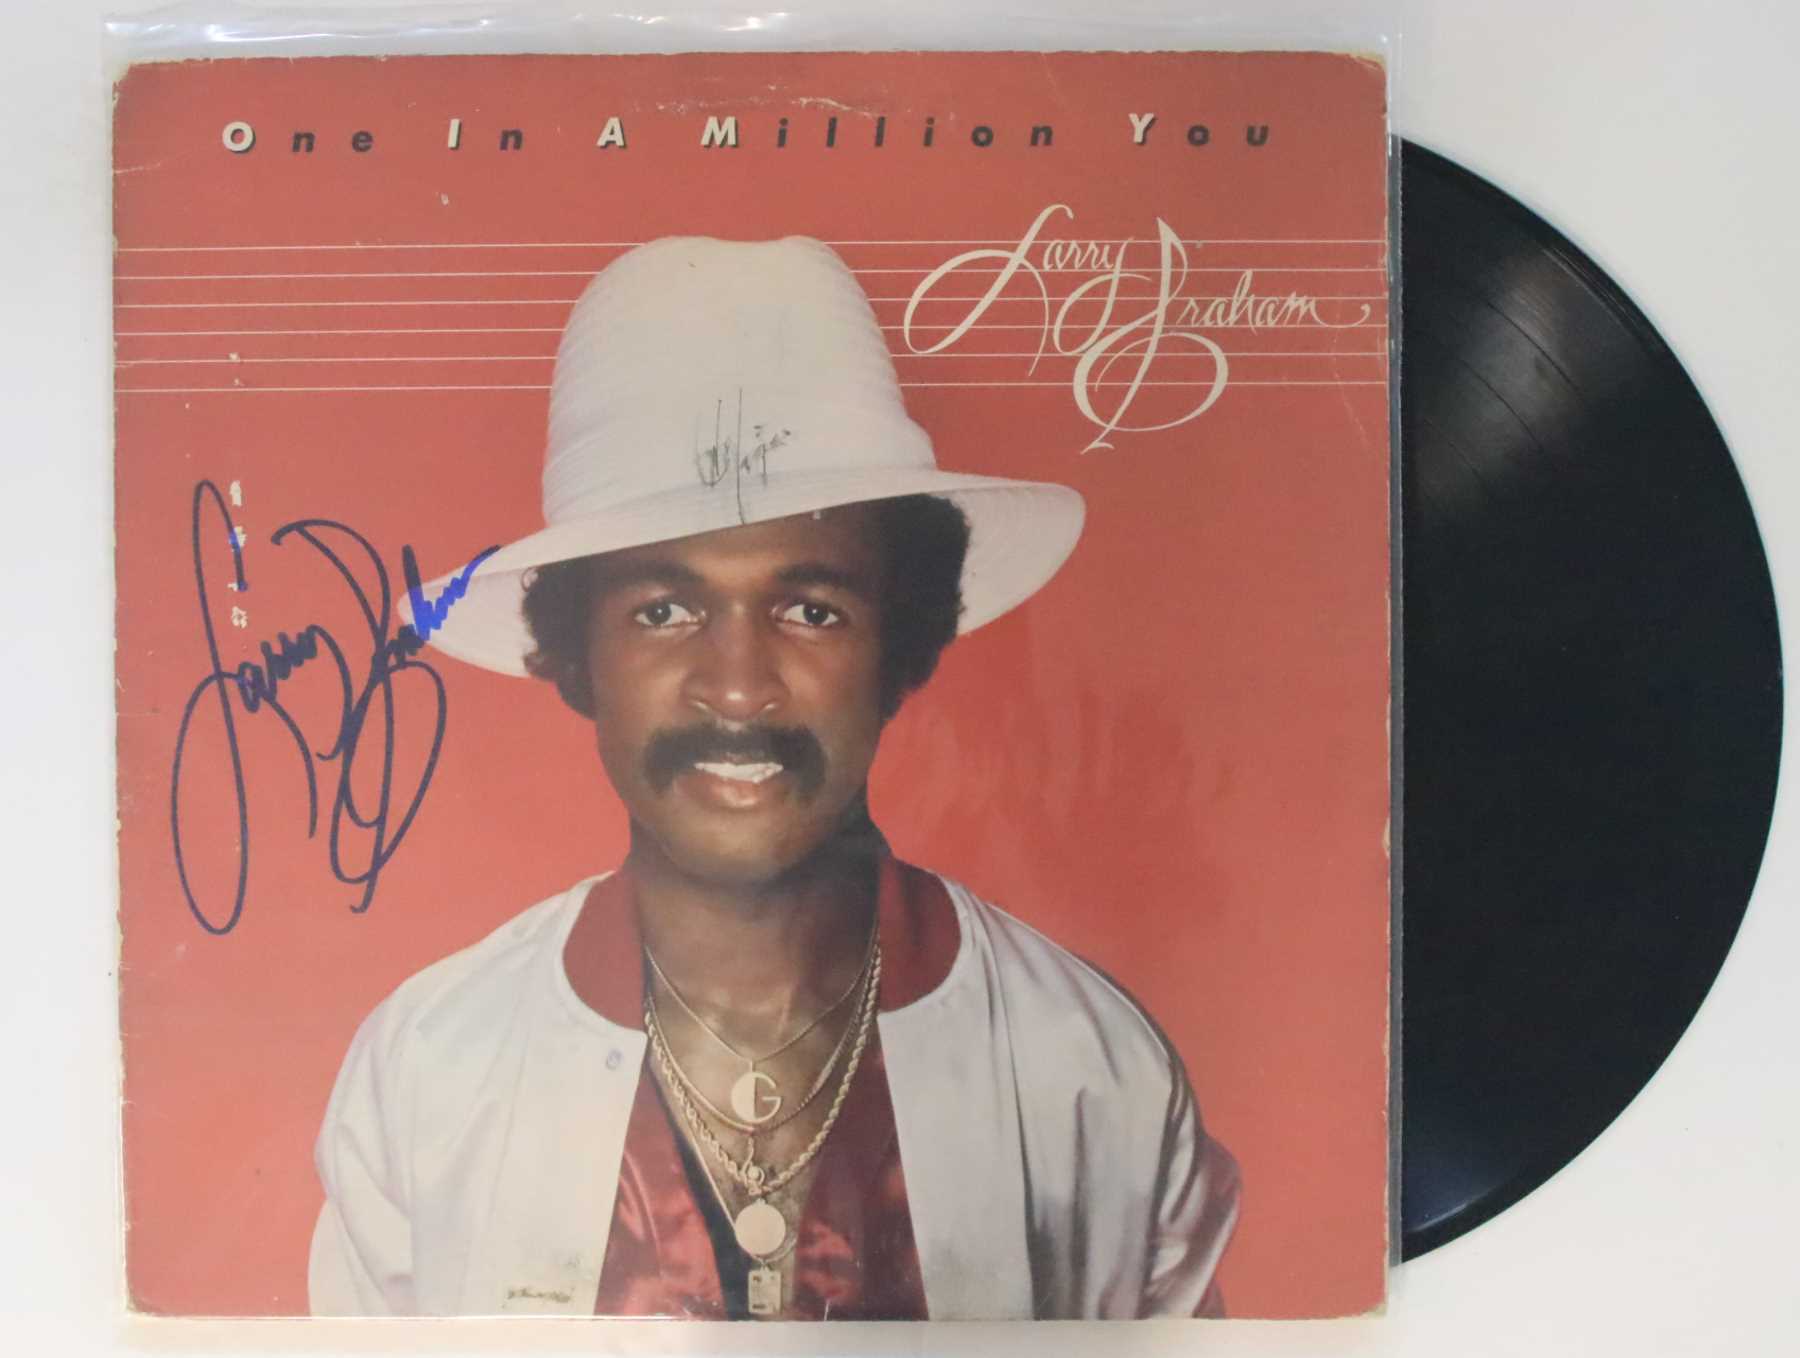 Larry Graham Signed Autographed One In a Million You Record Album w Proof Photo